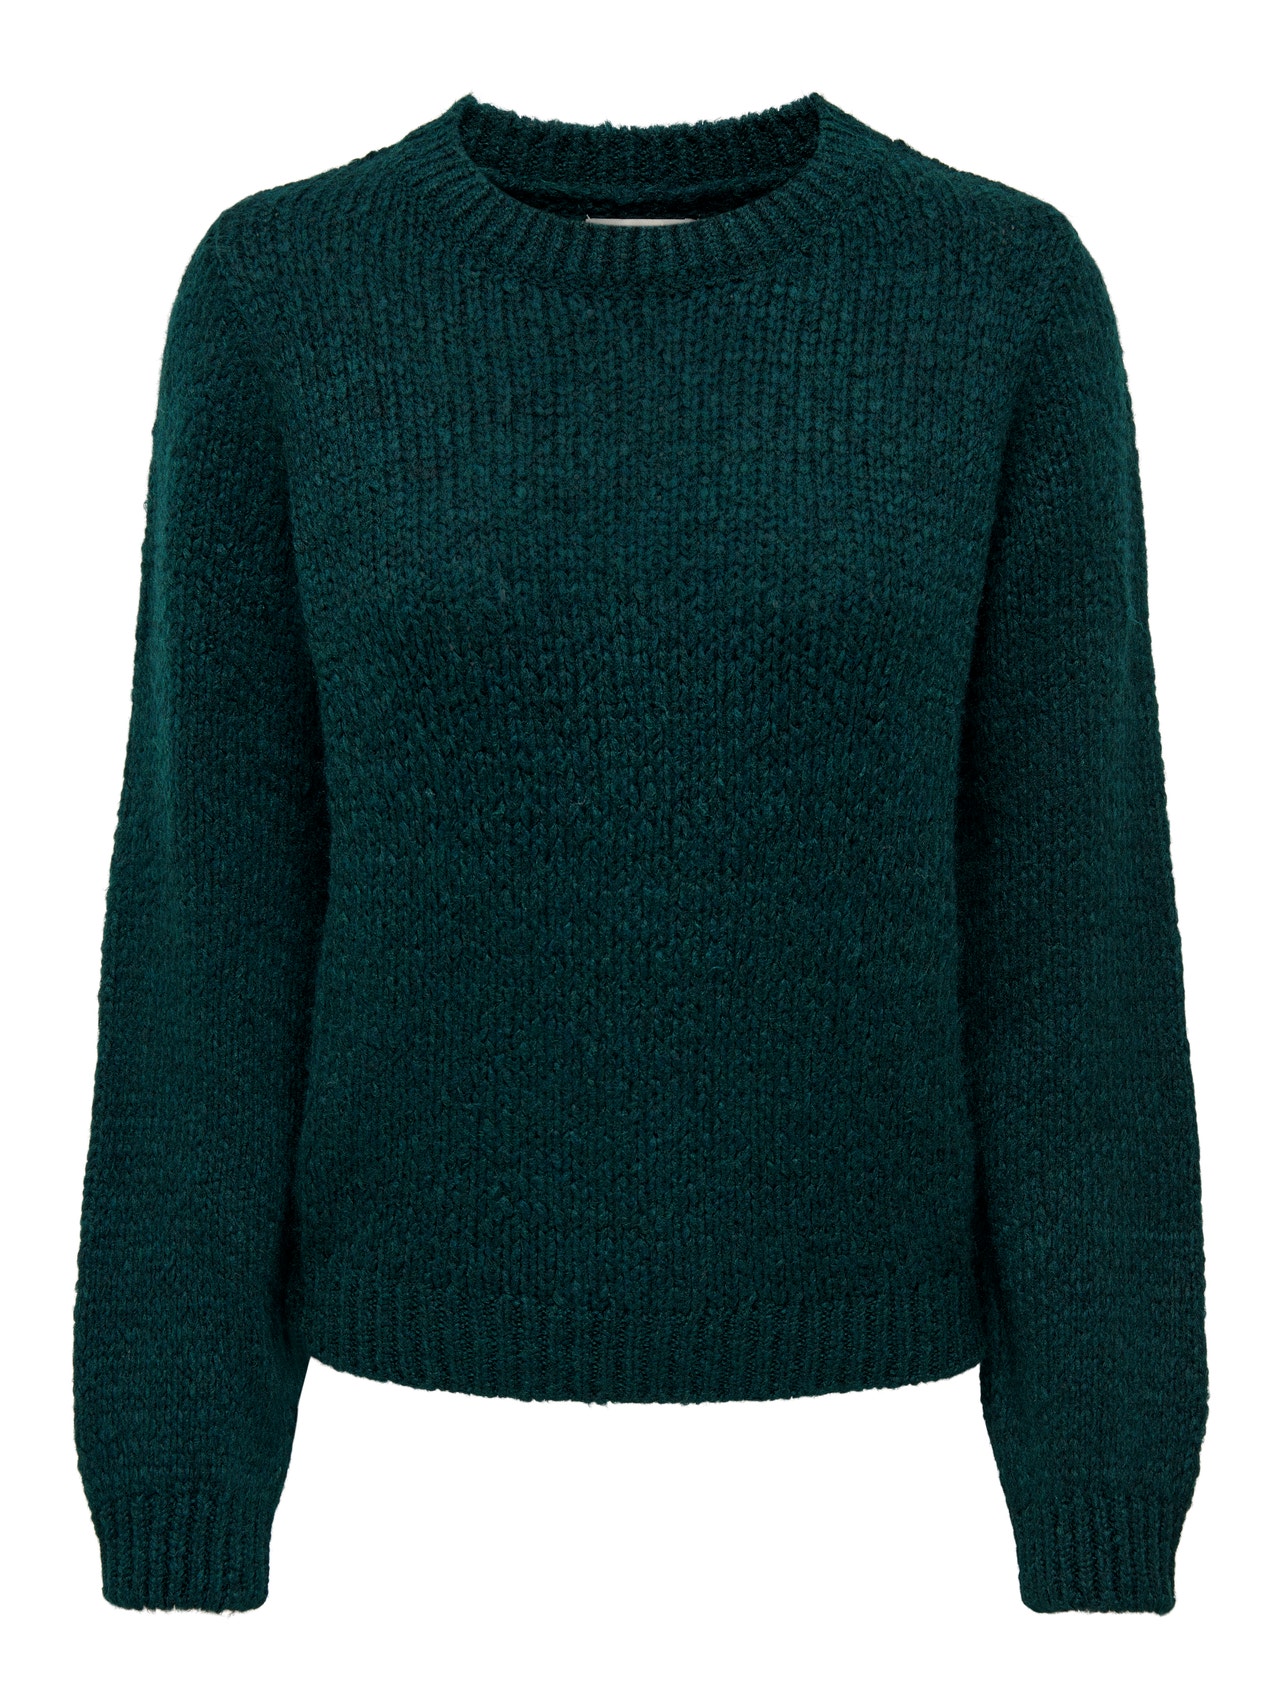 ONLY O-Neck Pullover -Deep Teal - 15268463